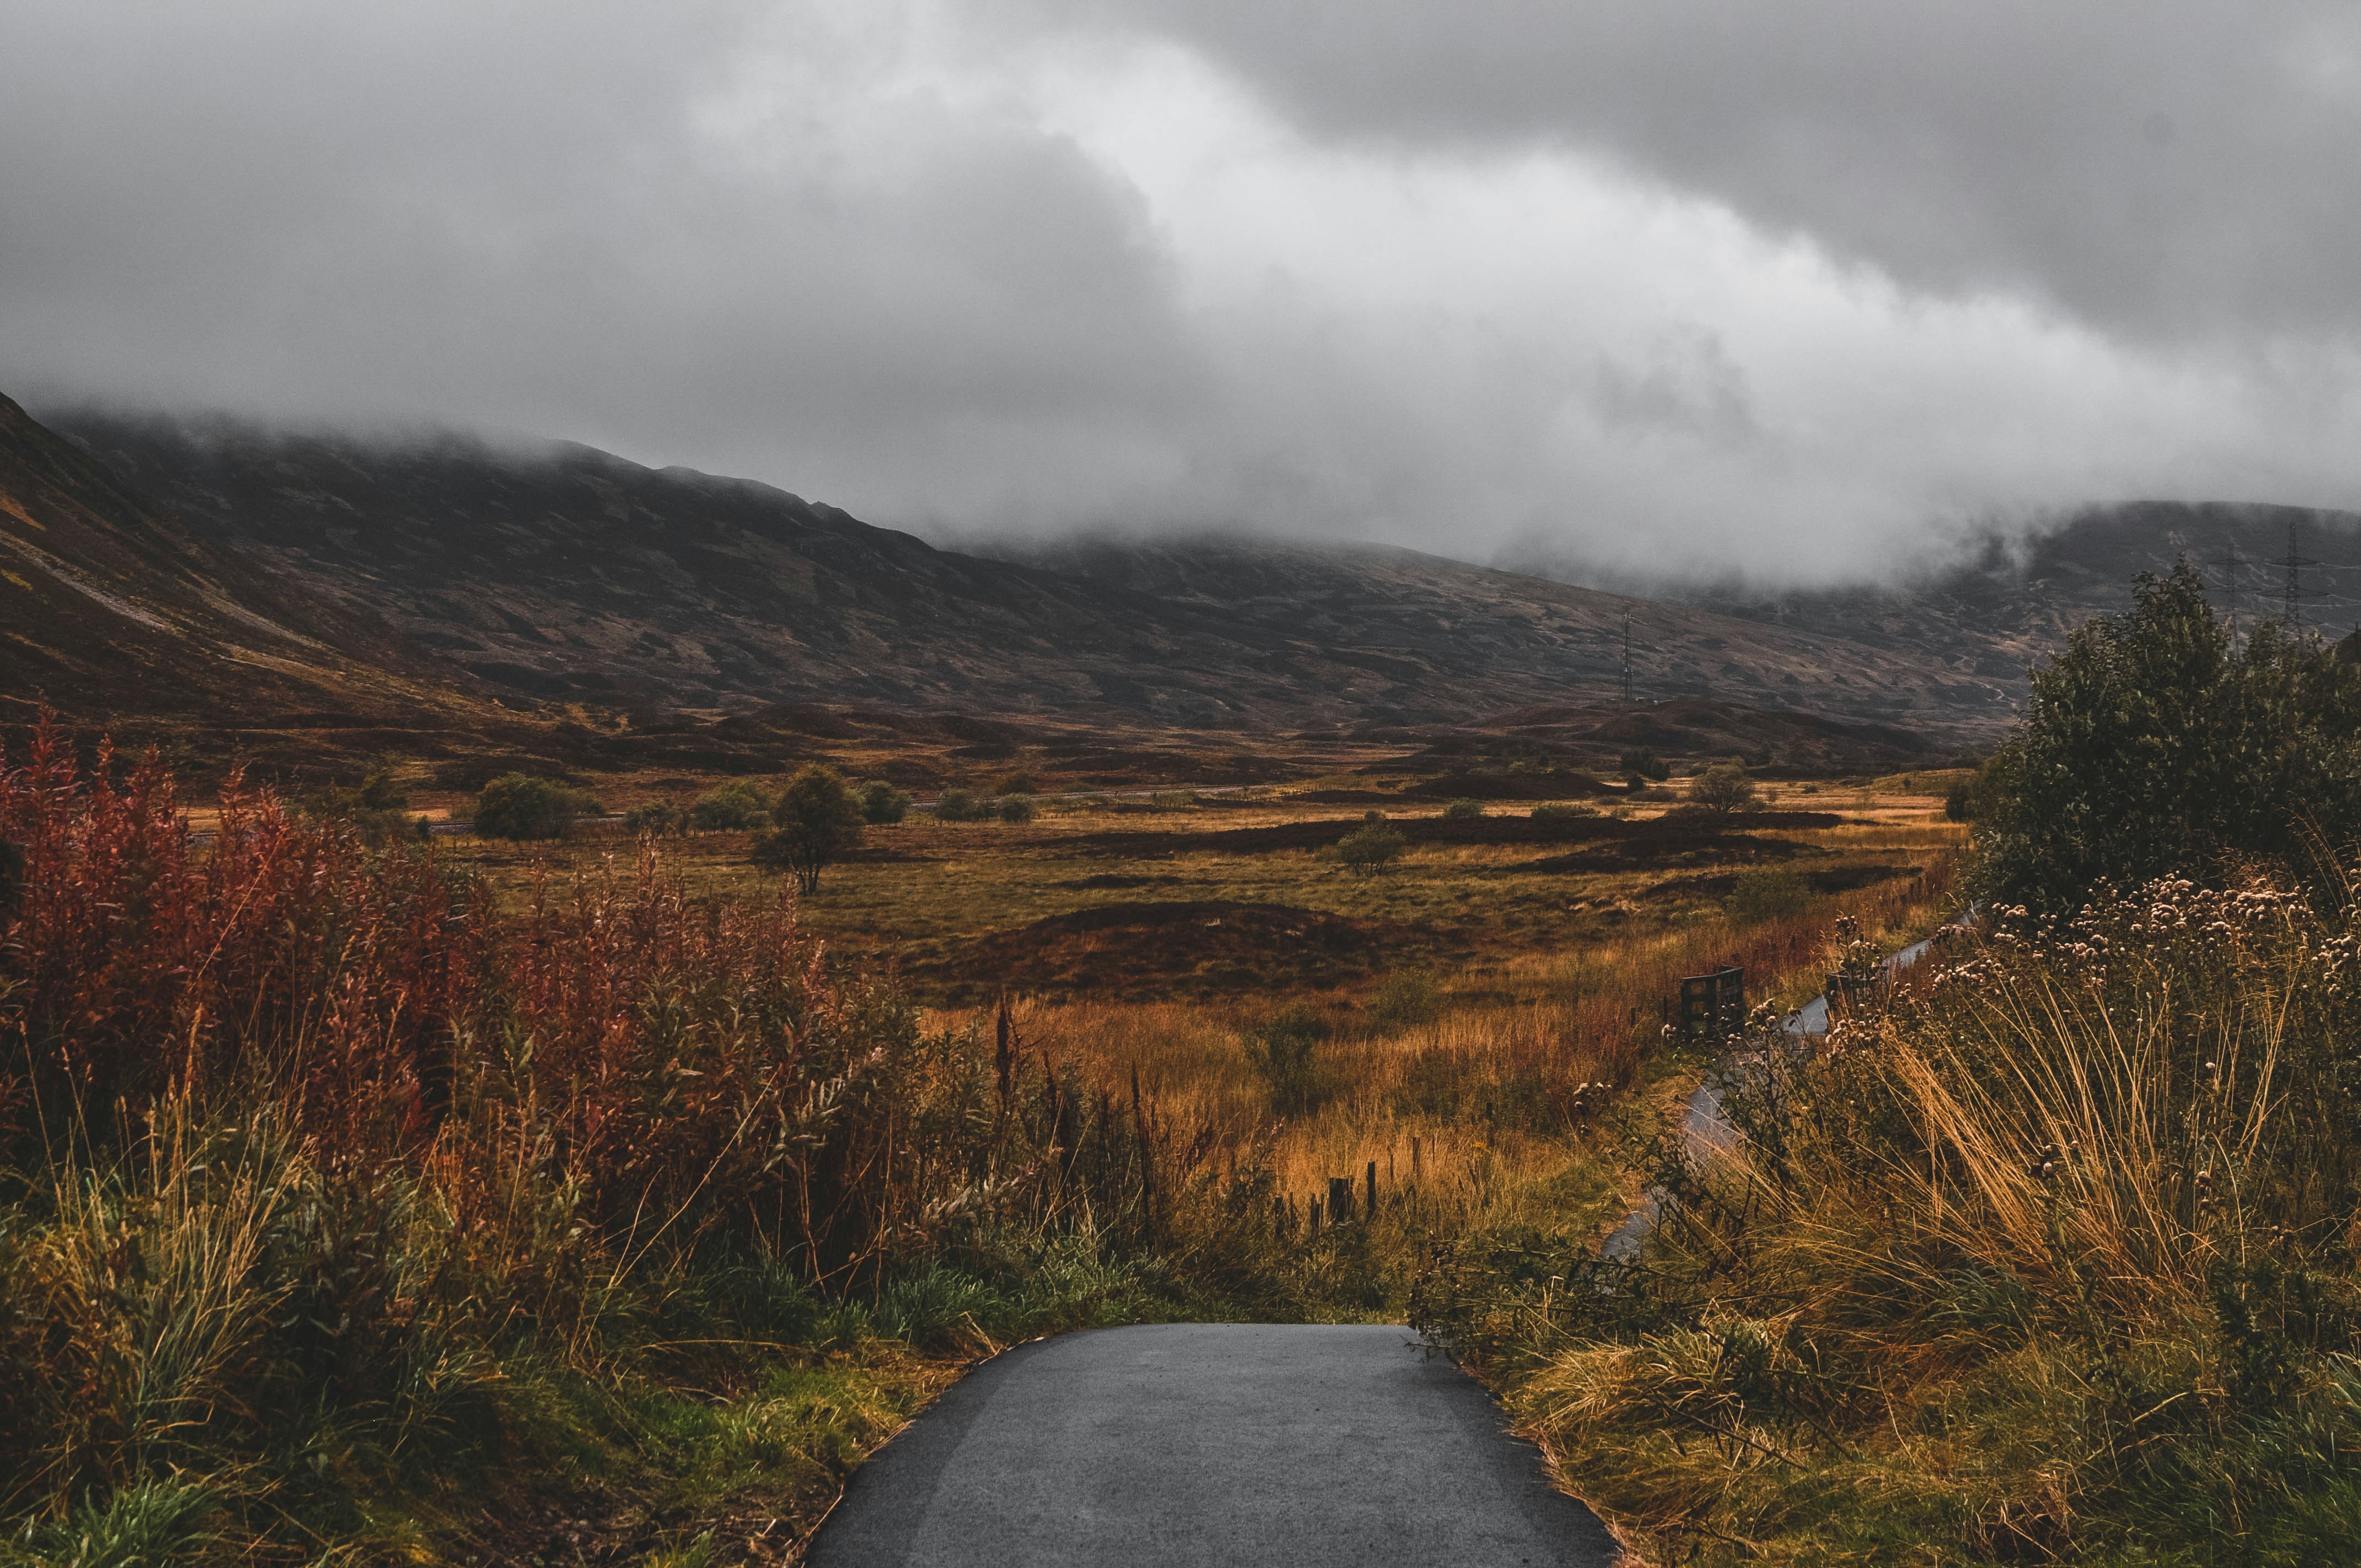 A path through the mountains of Skye. The clouds are grey and low, hiding the mountain.